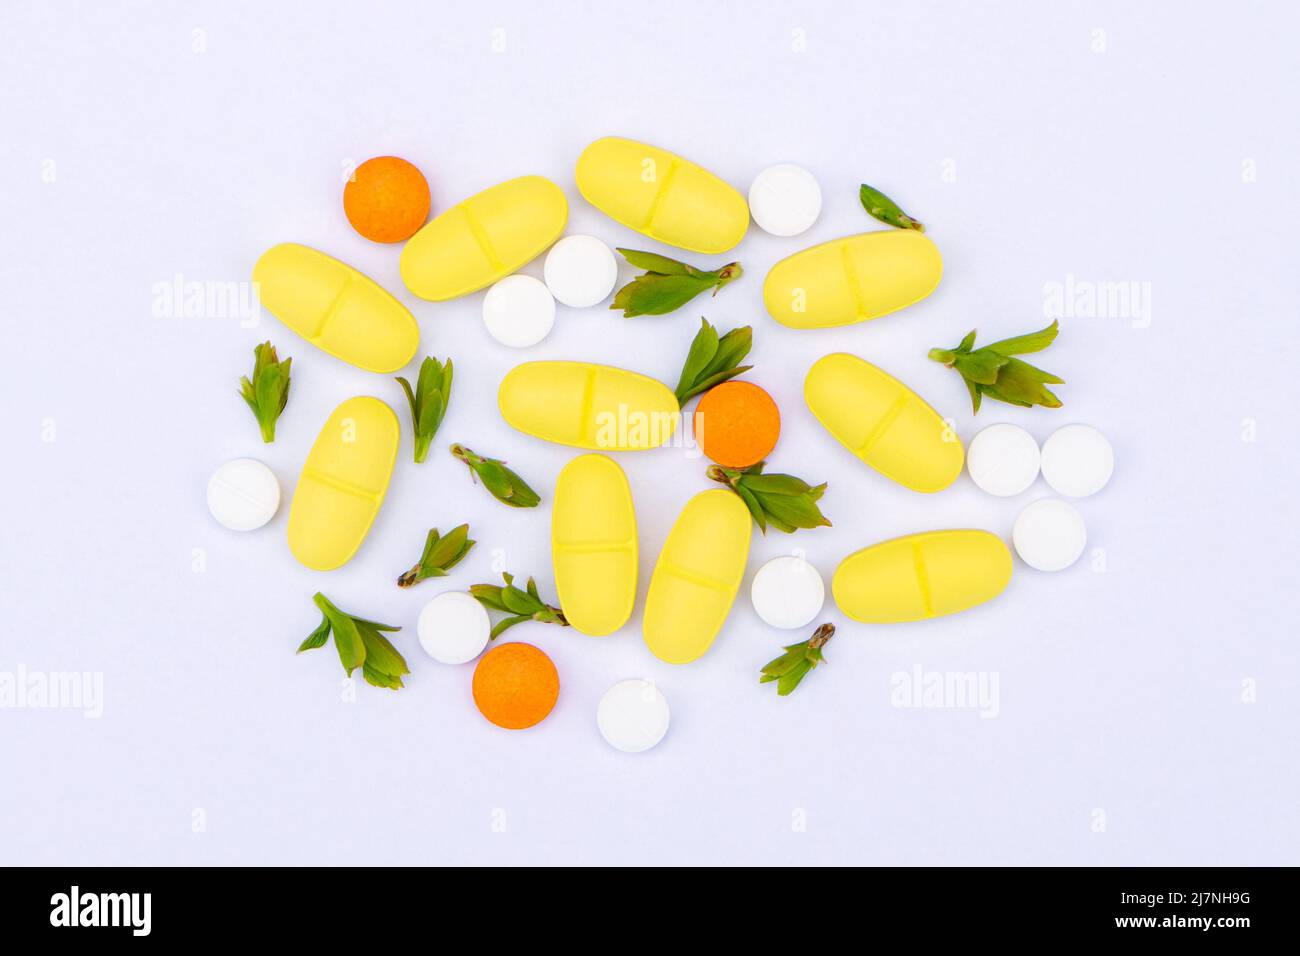 Pills with sprigs of plants on a white background Stock Photo